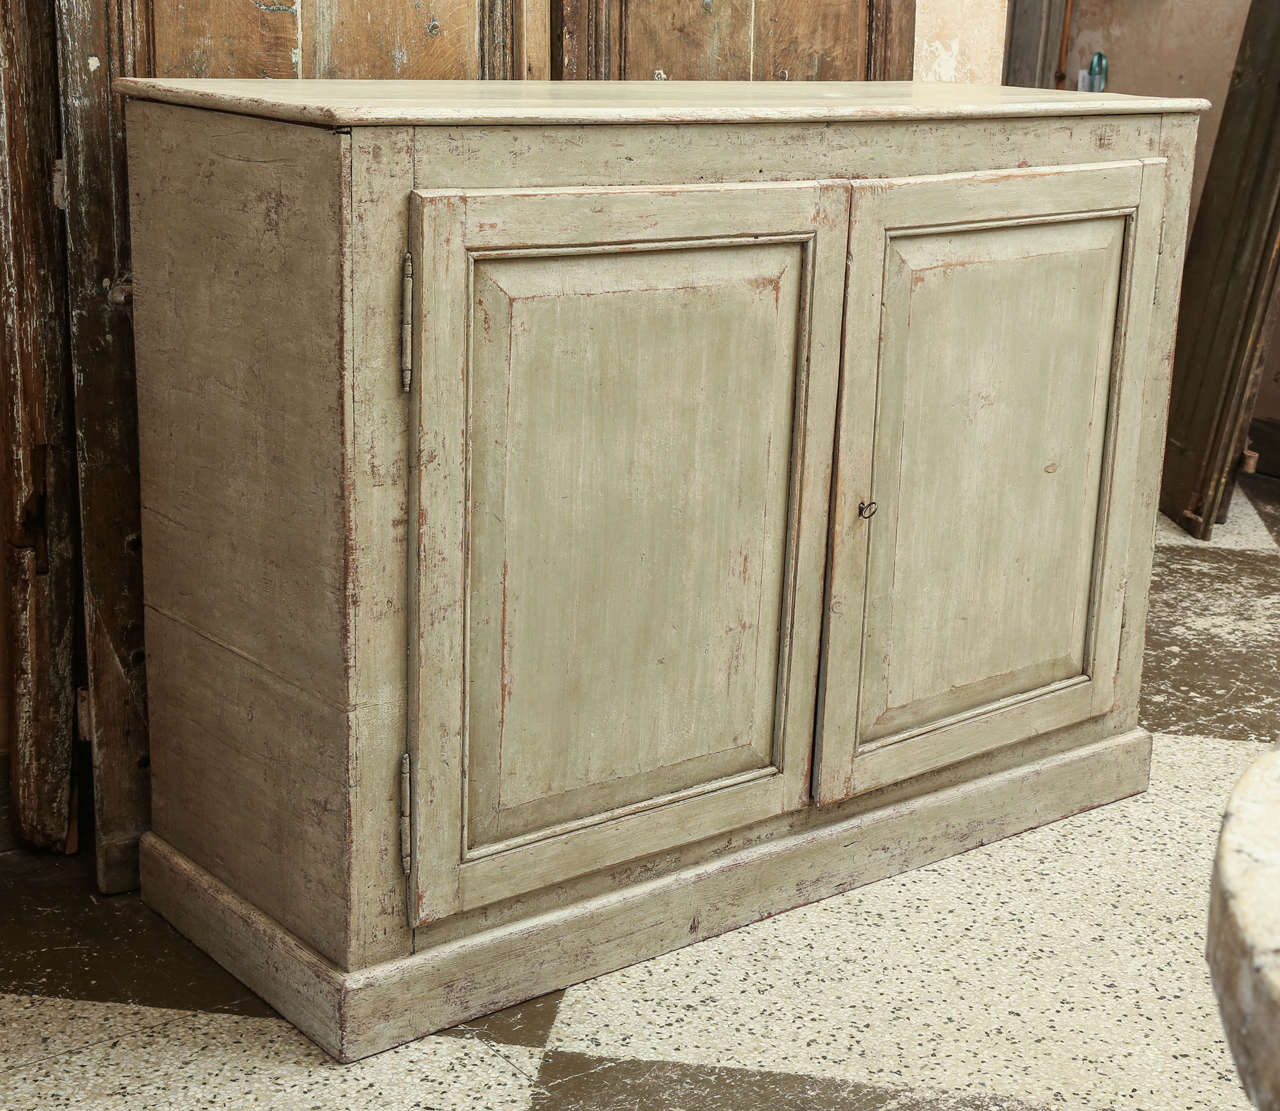 Late 18th - early 19th c. two door cabinet from Italy. Later painted and scraped finish.